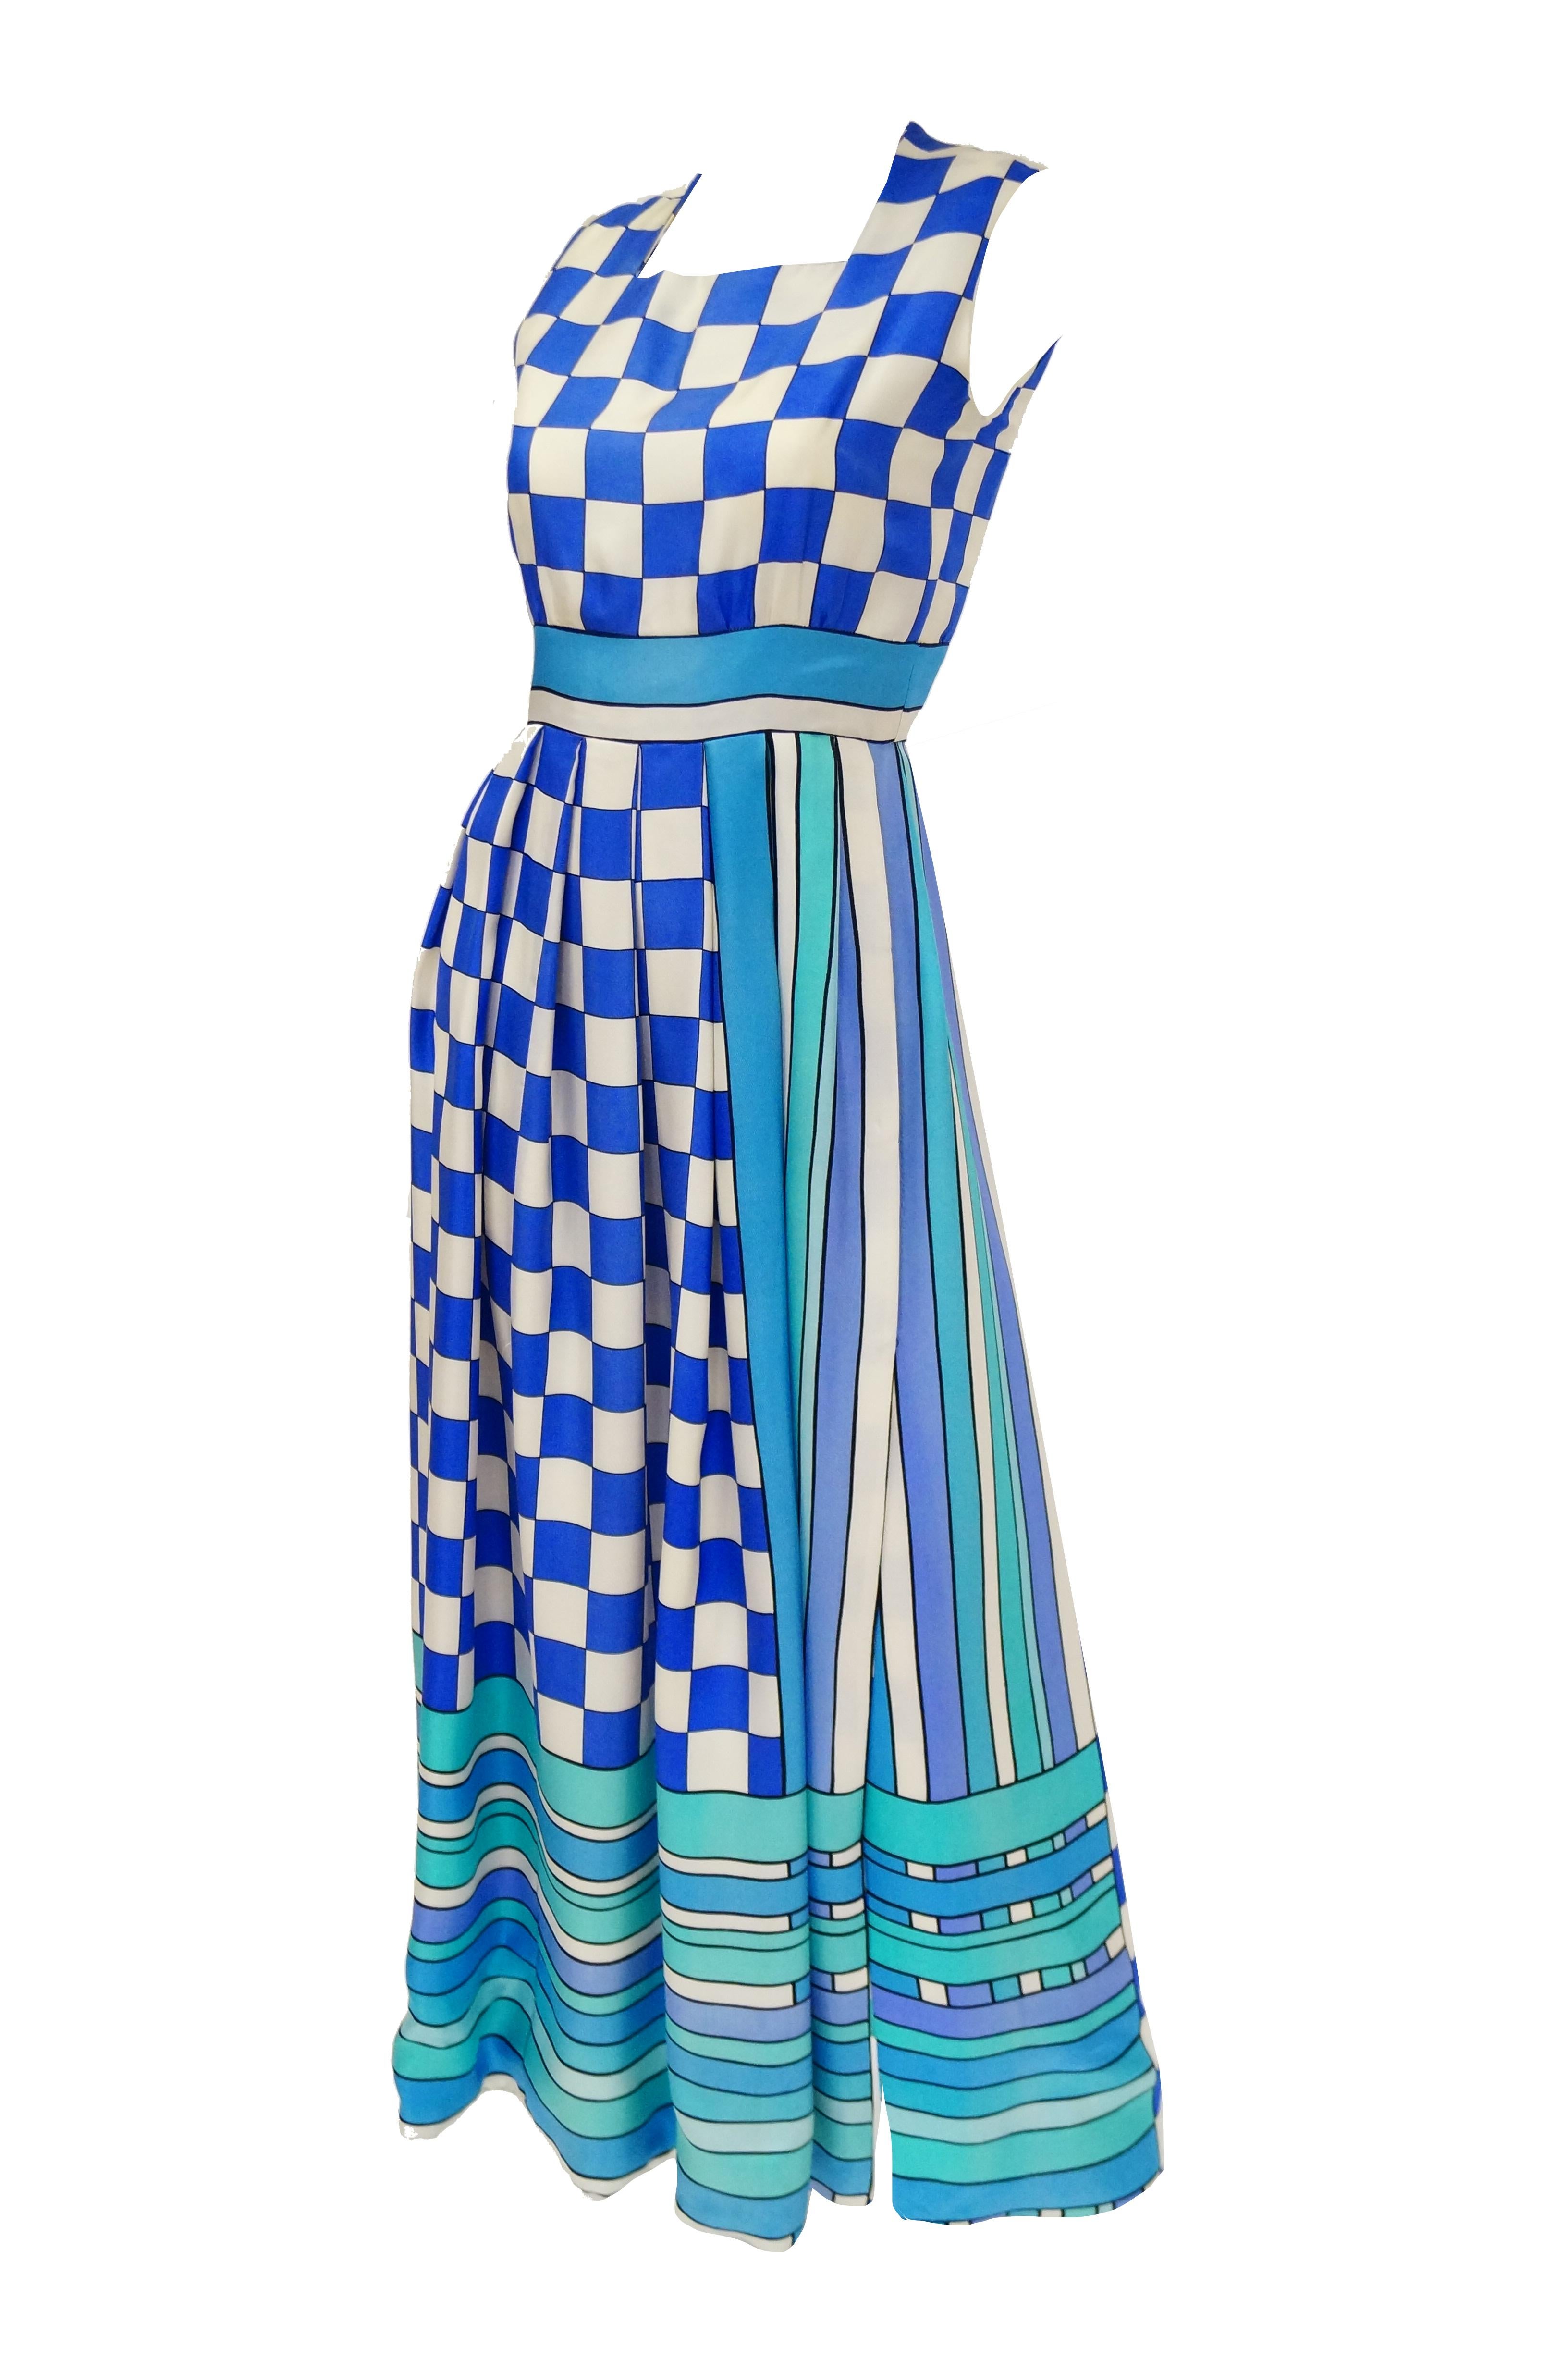 Women's 1960s Tina Leser Blue Checkerboard Print Dress with Graphic Blue Hem For Sale